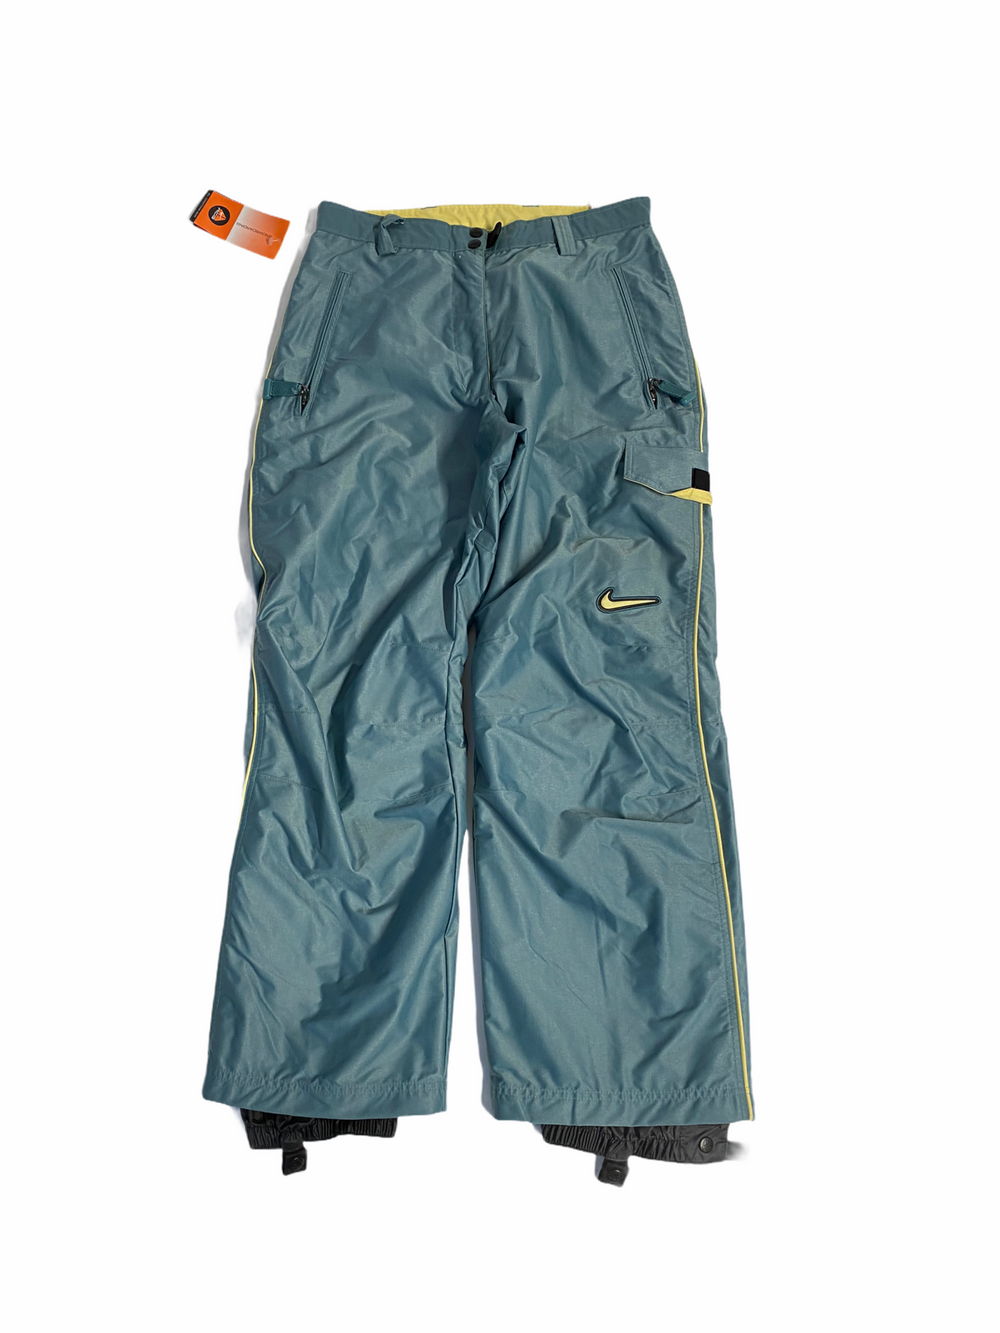 Woman’s Nike ACG Trousers with Green & Yellow Detailing - Not In Your Wardrobe™ - [Vendor]